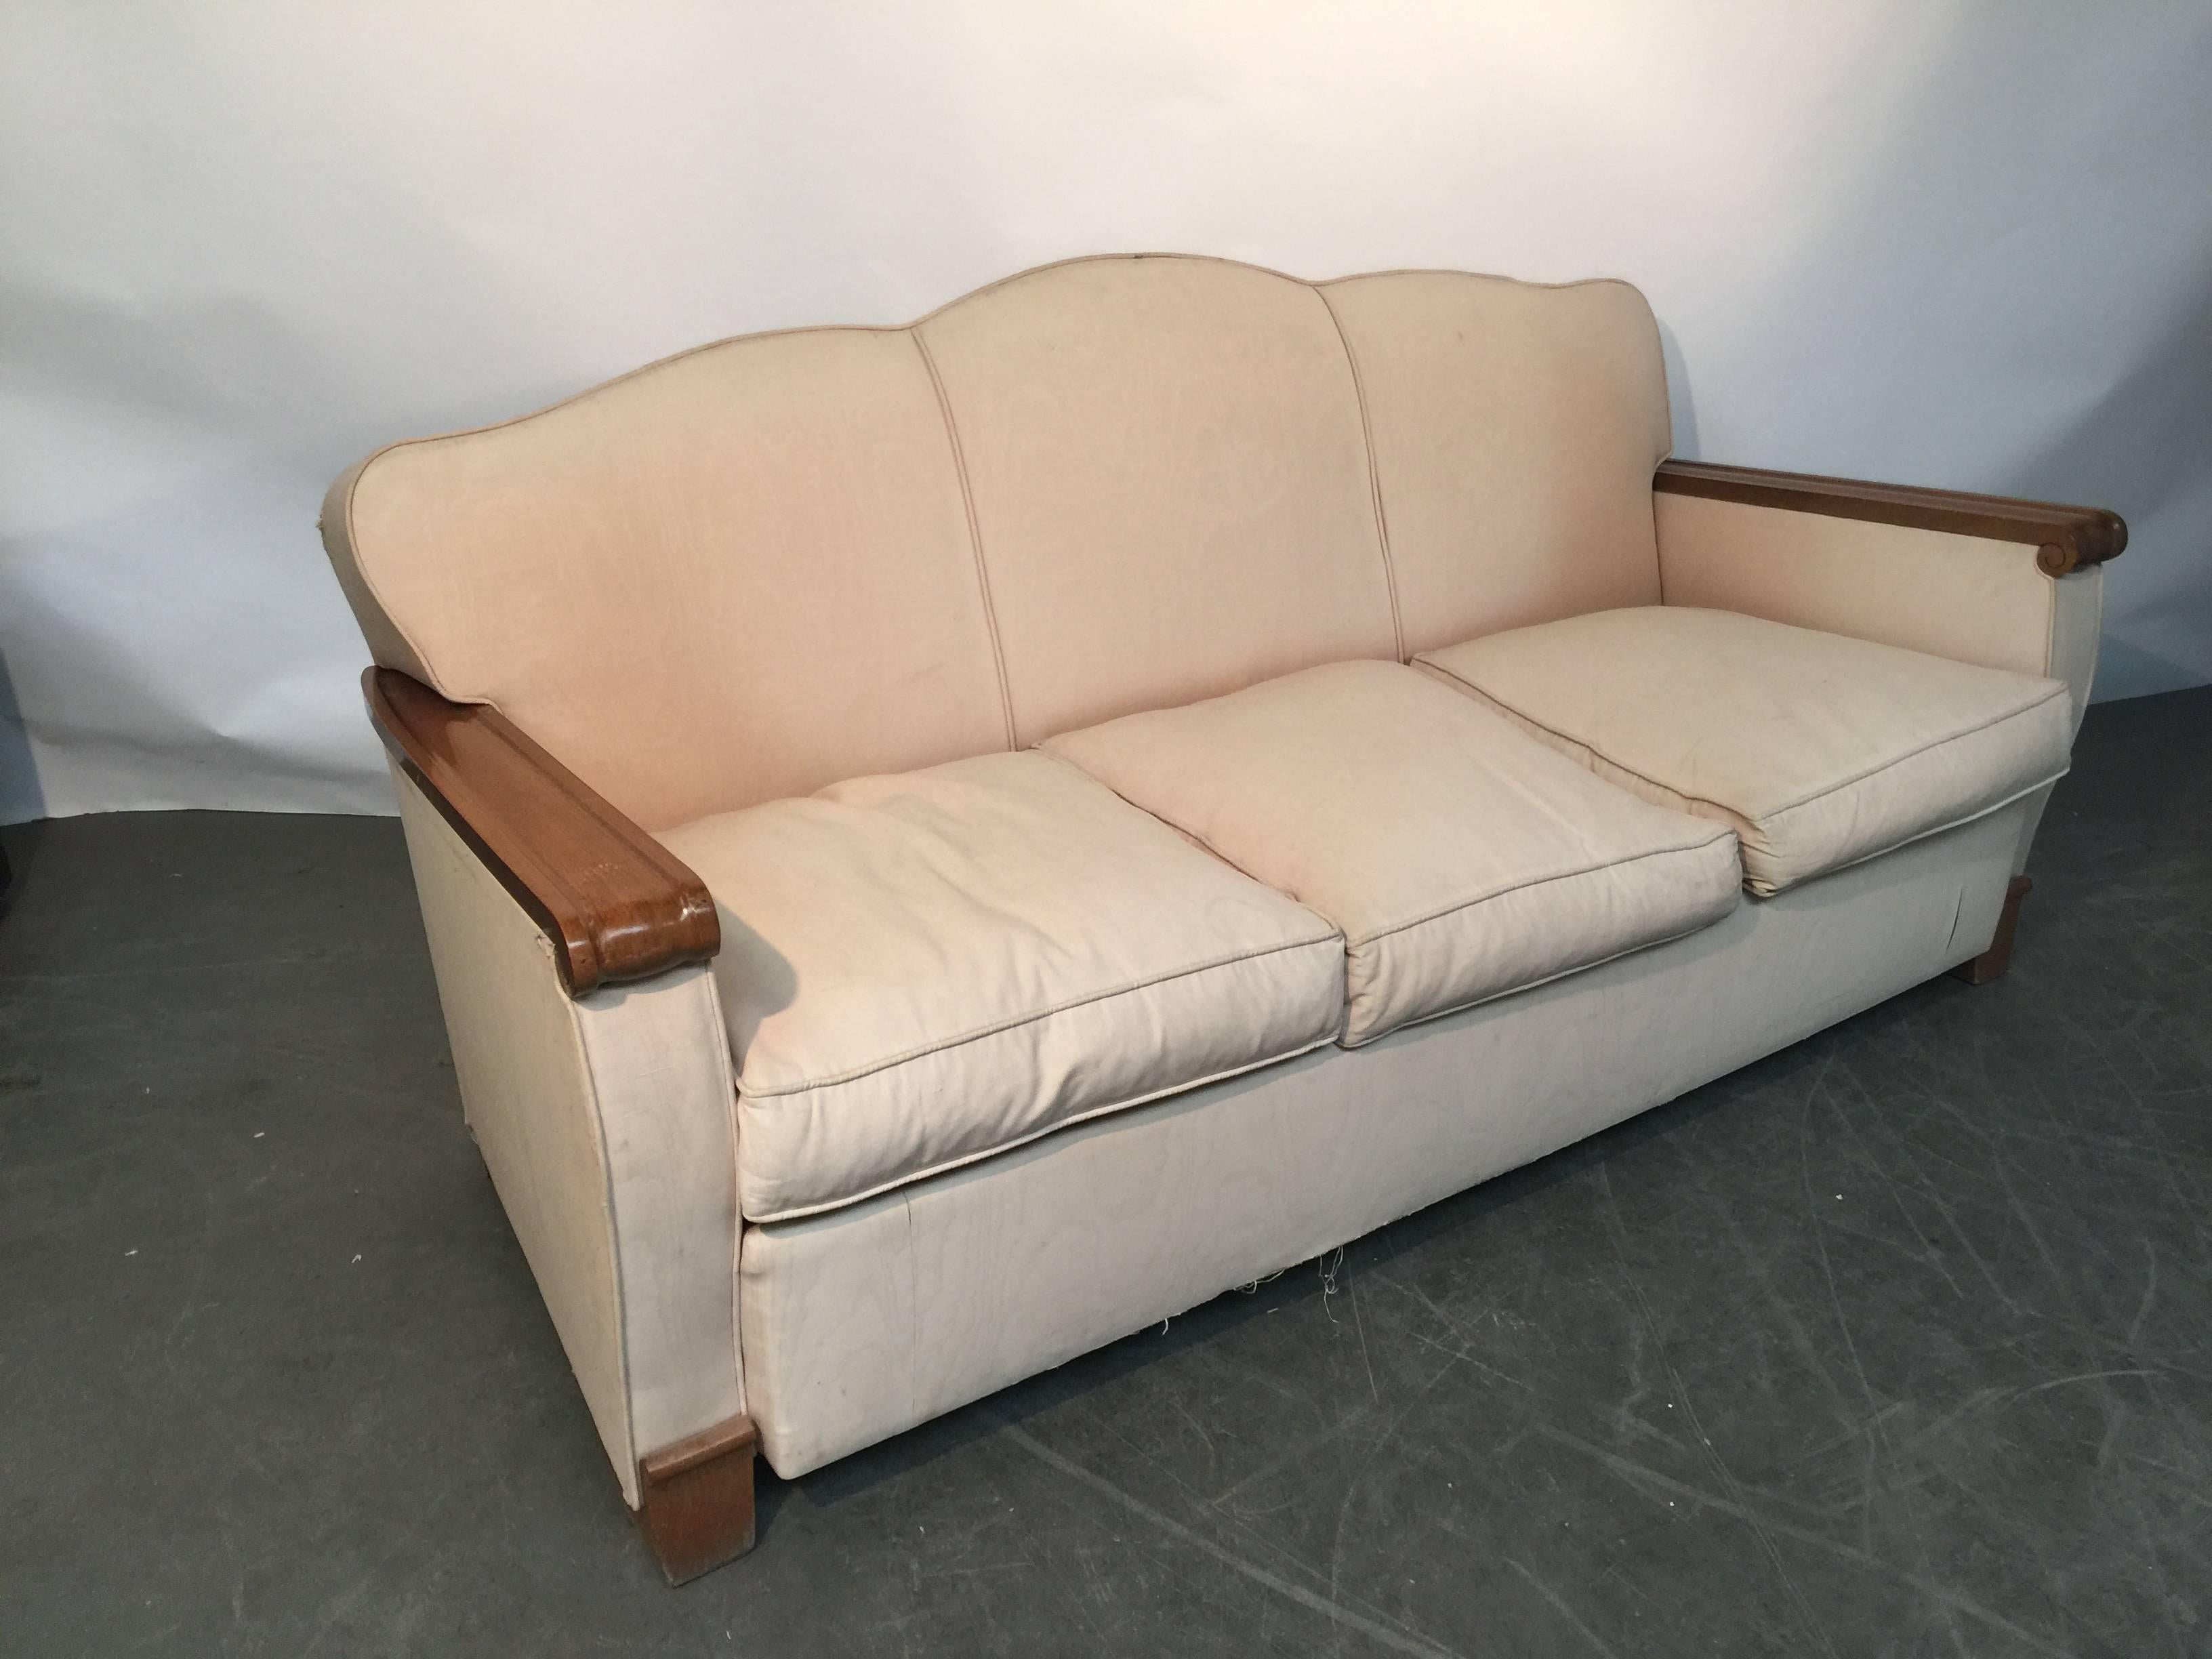 Gaston Poisson, Art Deco walnut sofa.
Need new reupholstery.
A pair of armchair on the same model also available.
Four others armchairs on the same model  also available.